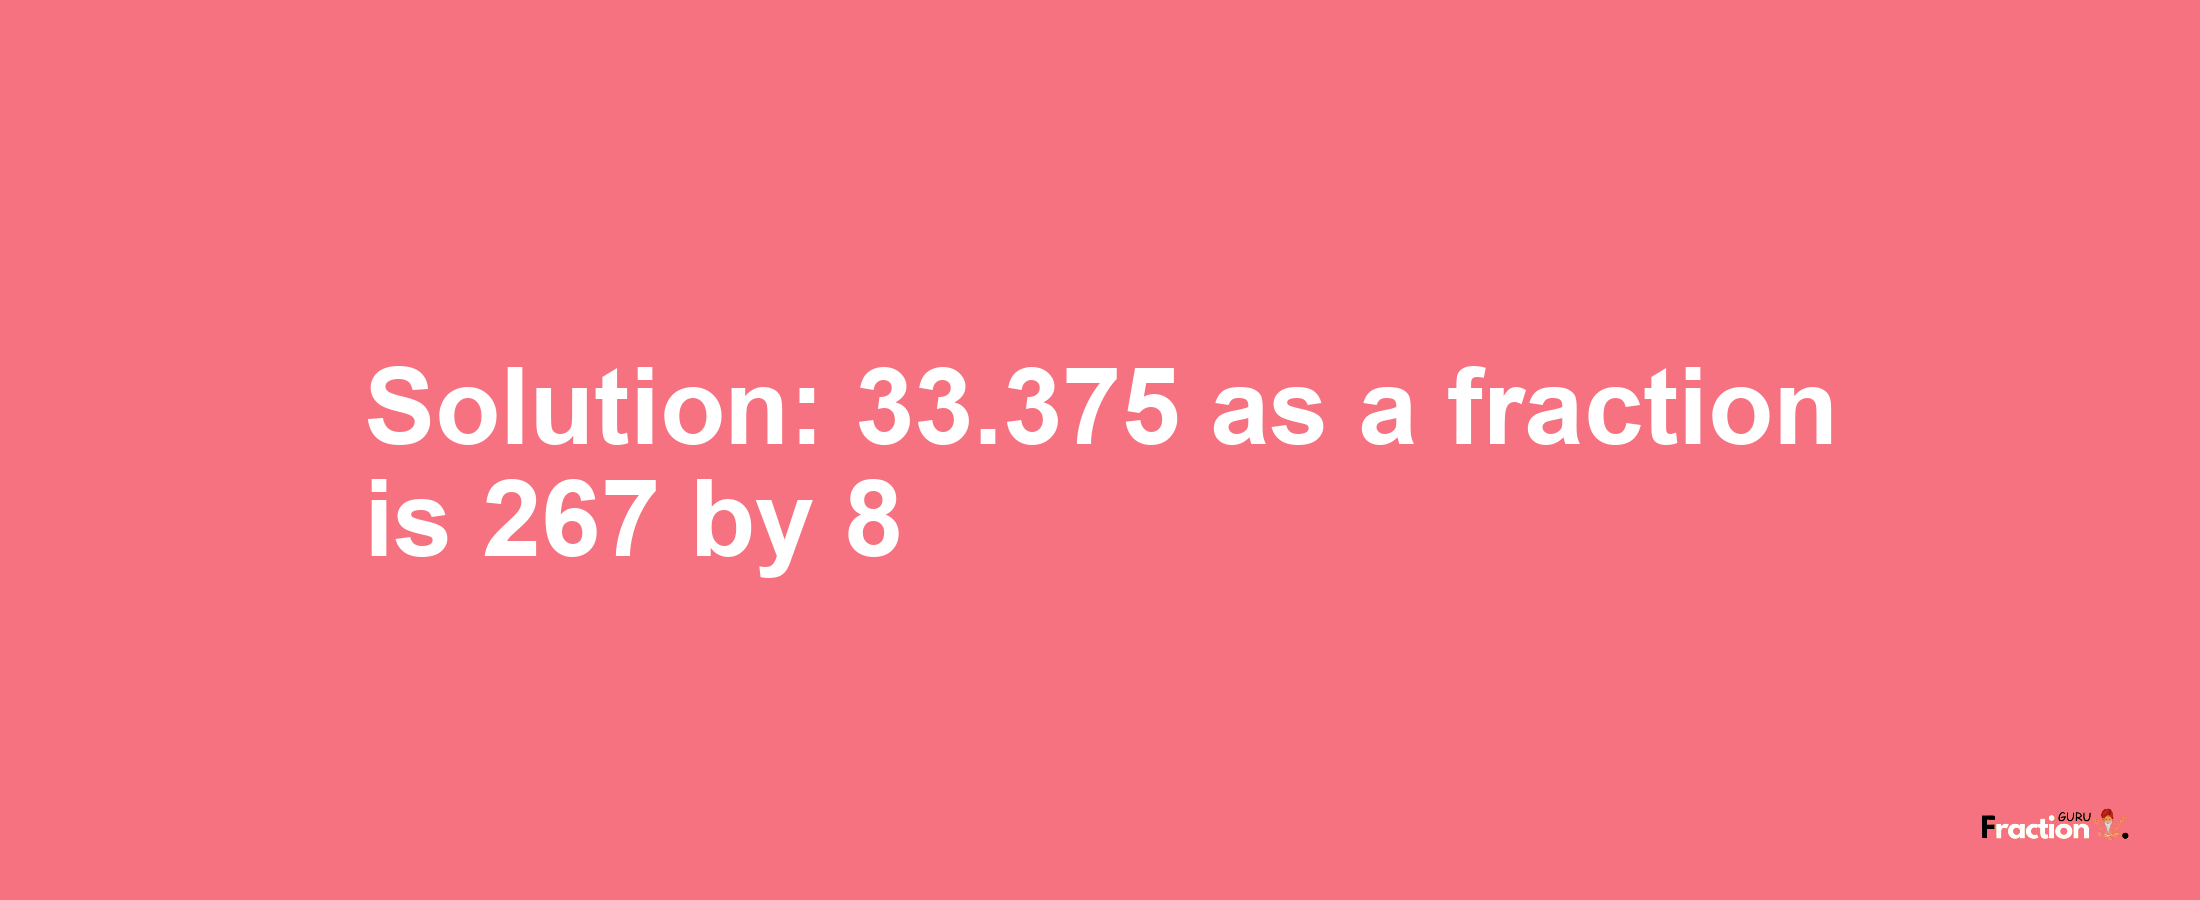 Solution:33.375 as a fraction is 267/8